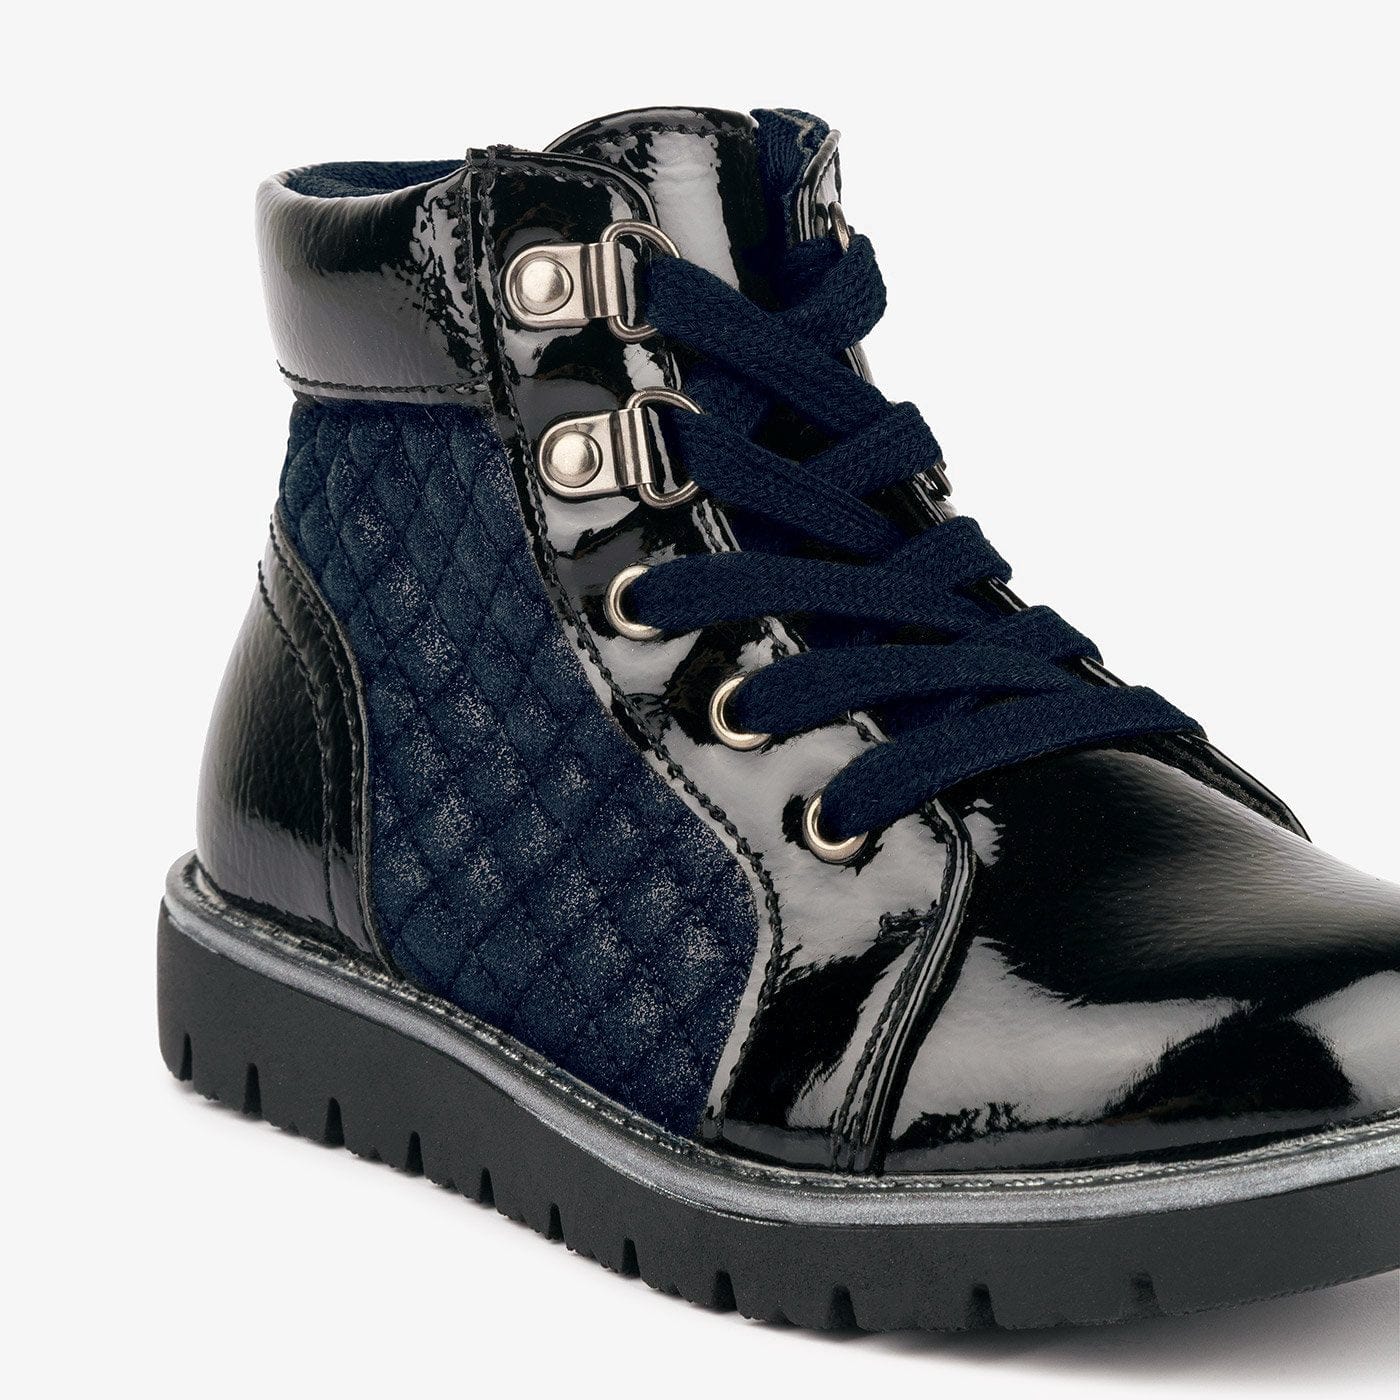 CONGUITOS Shoes Girl's Navy Quilted Patent Leather Boots